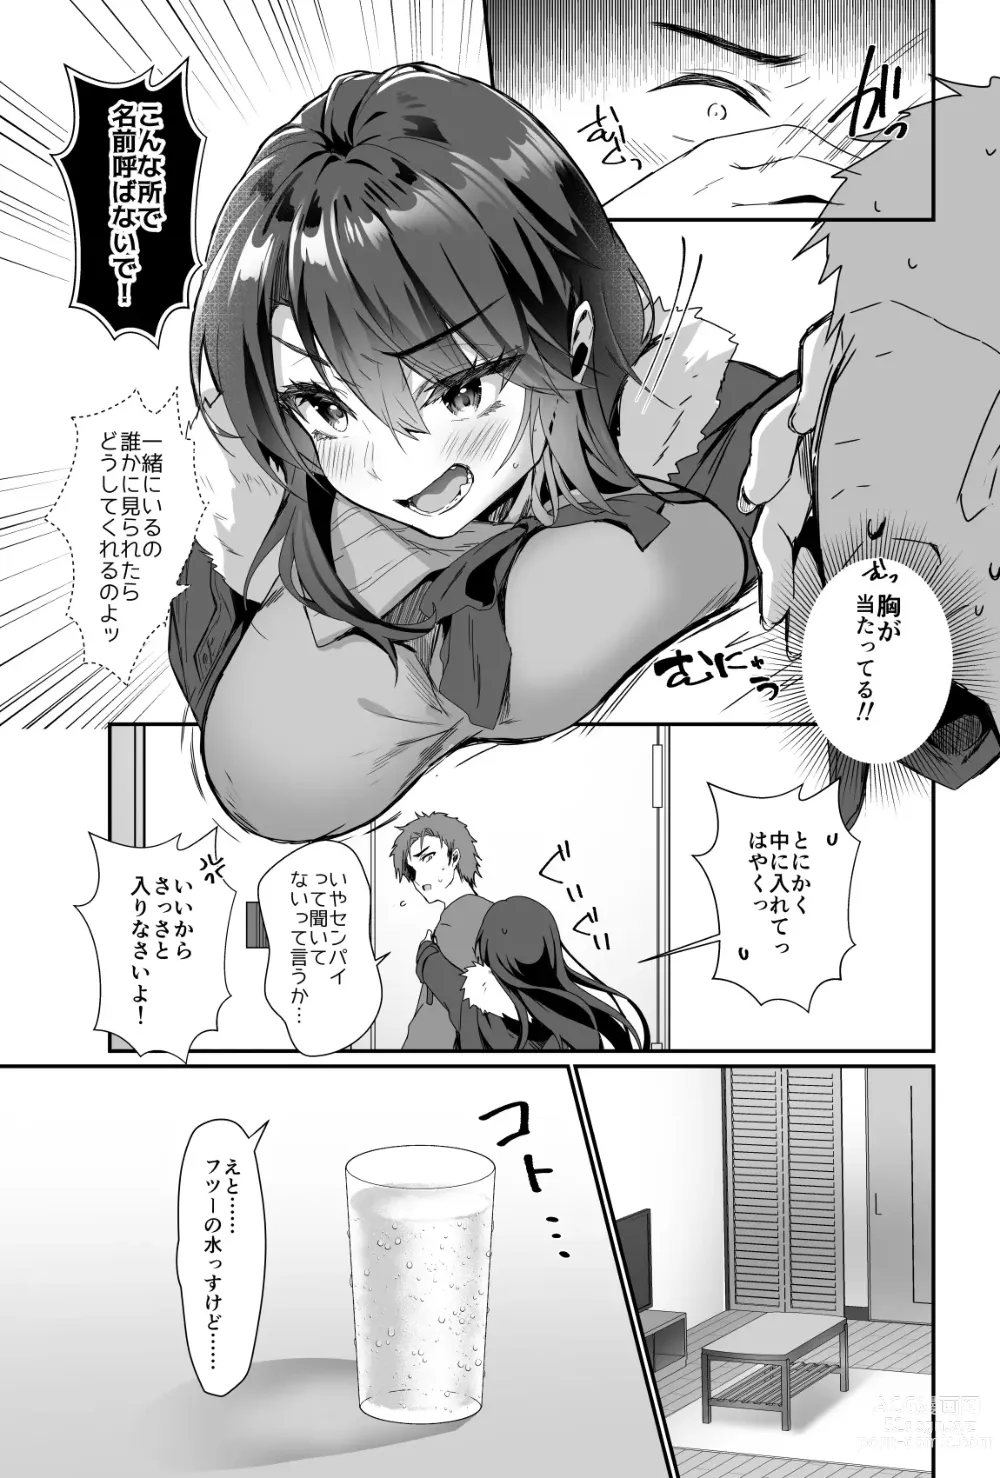 Page 4 of doujinshi Oppai Maid Delivery  2